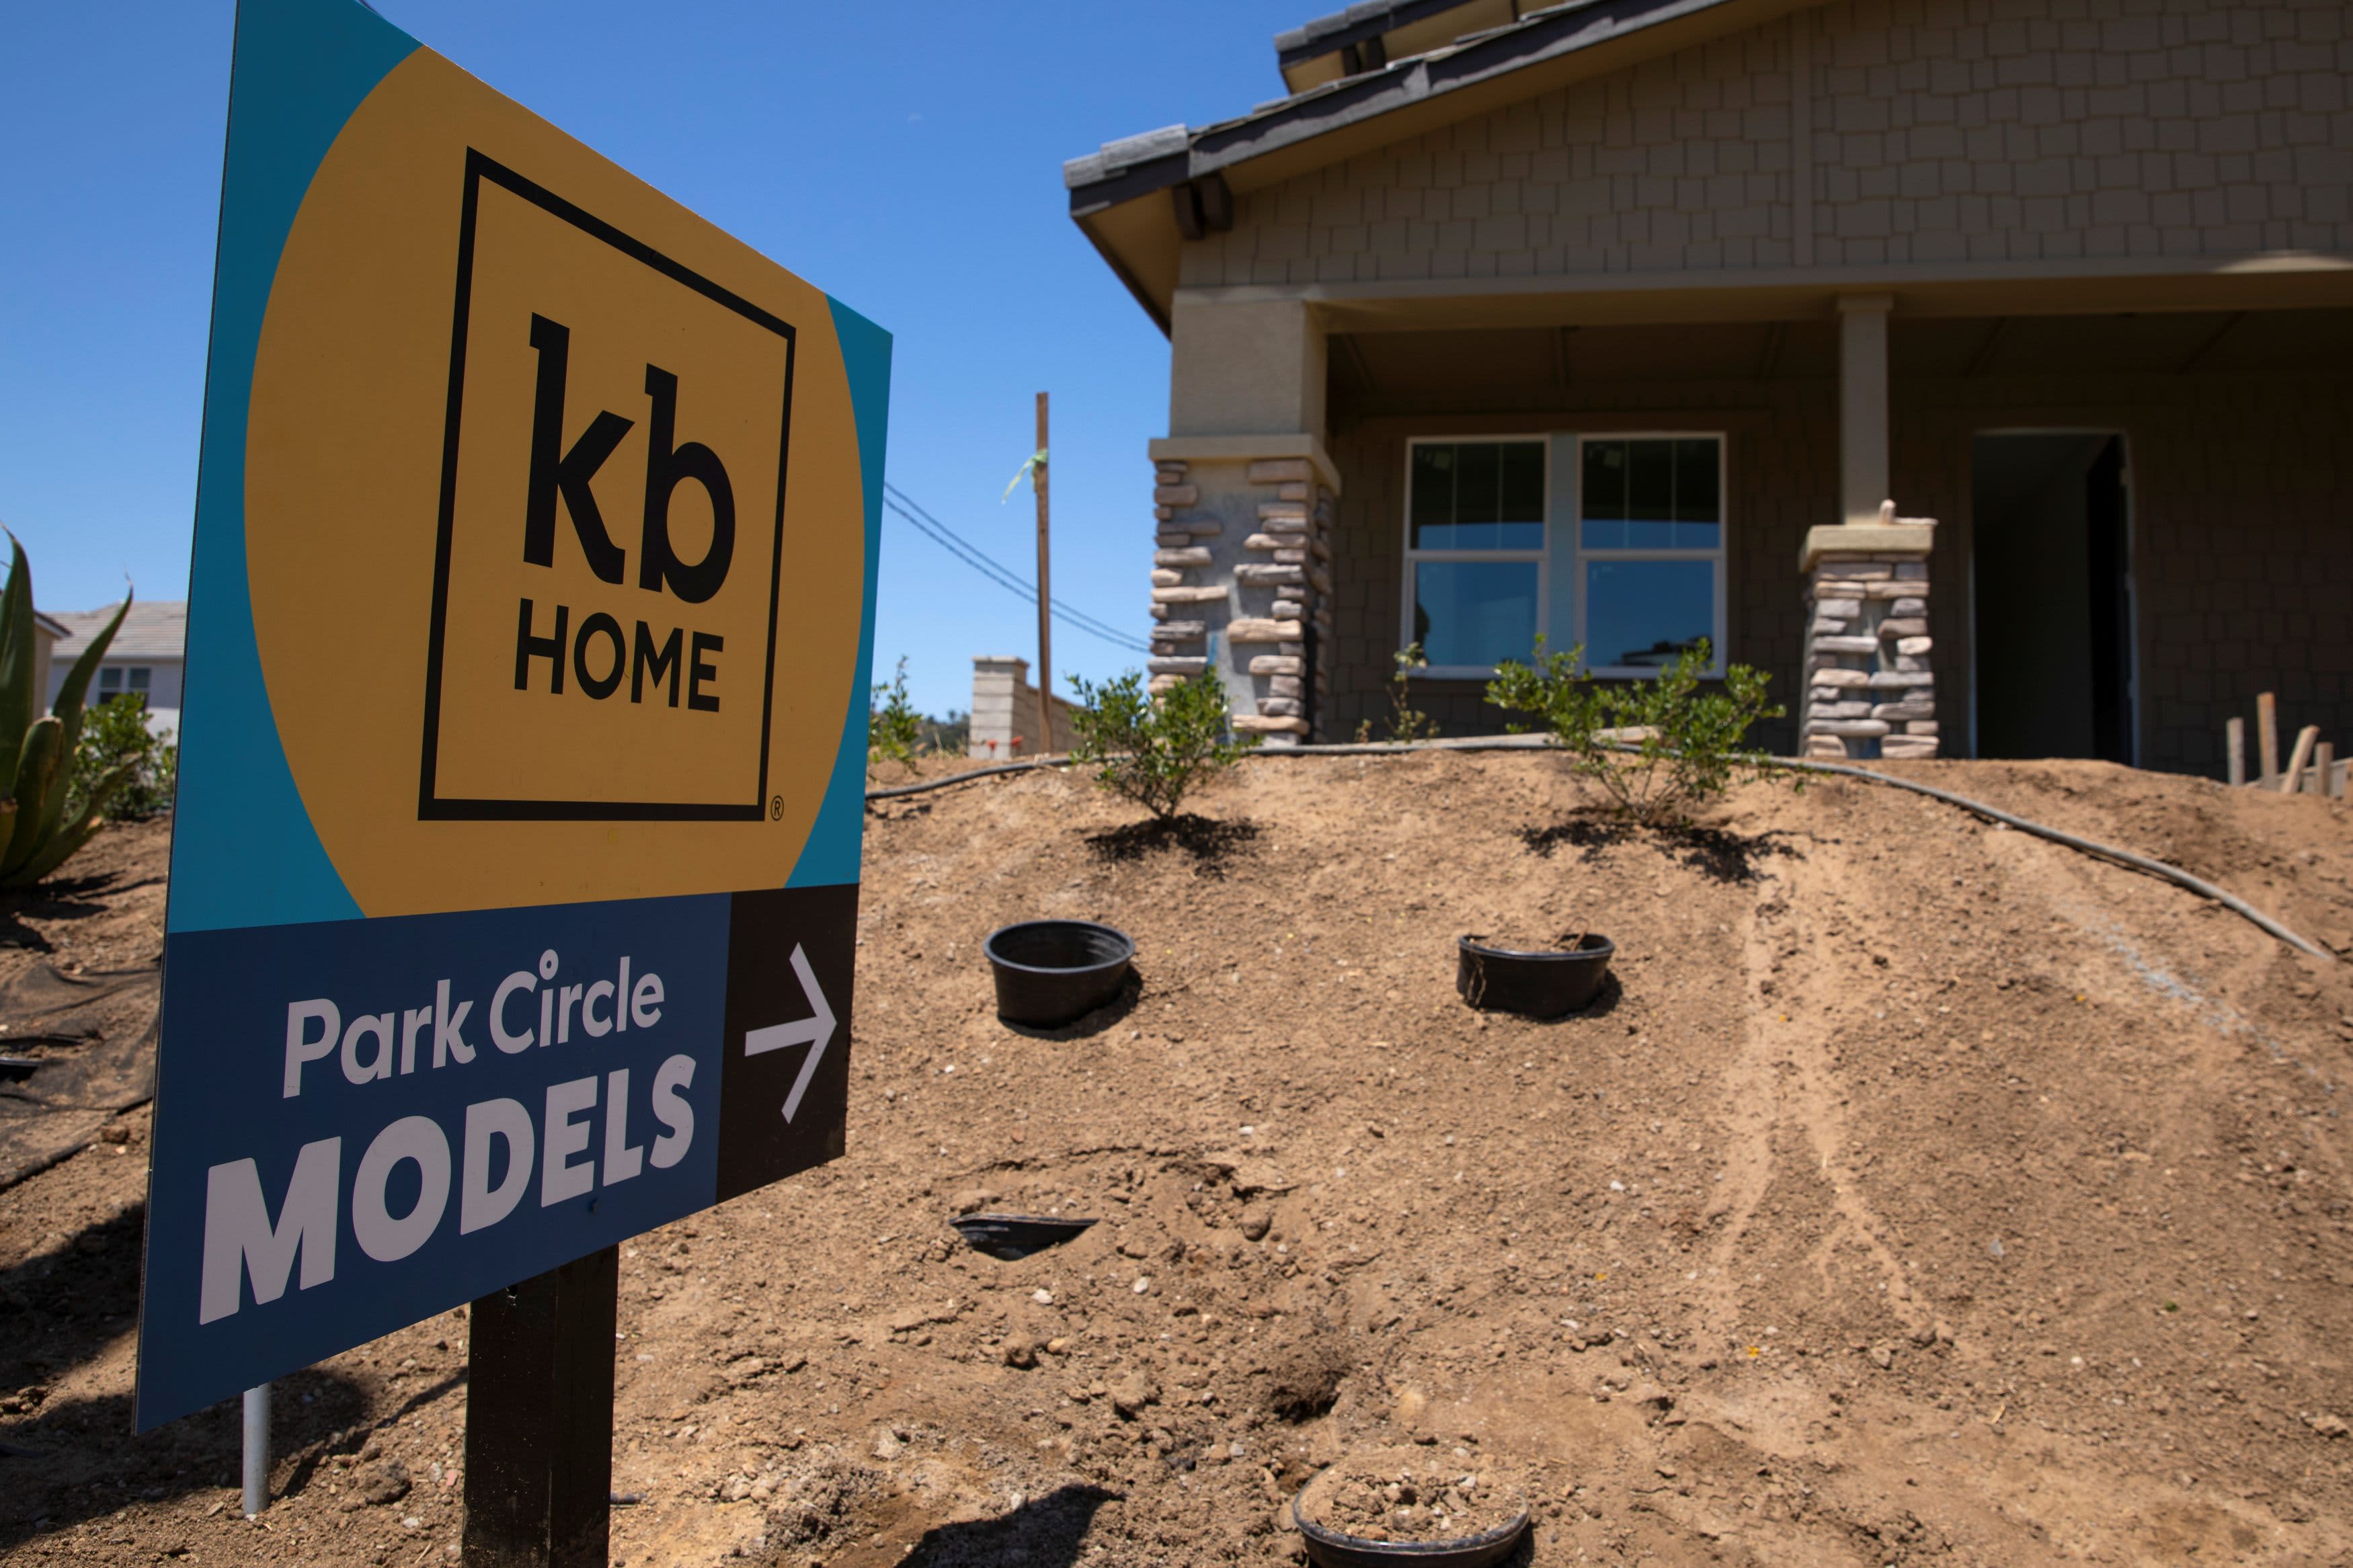 JPMorgan double downgrades KB Home to underweight, says valuation is too high